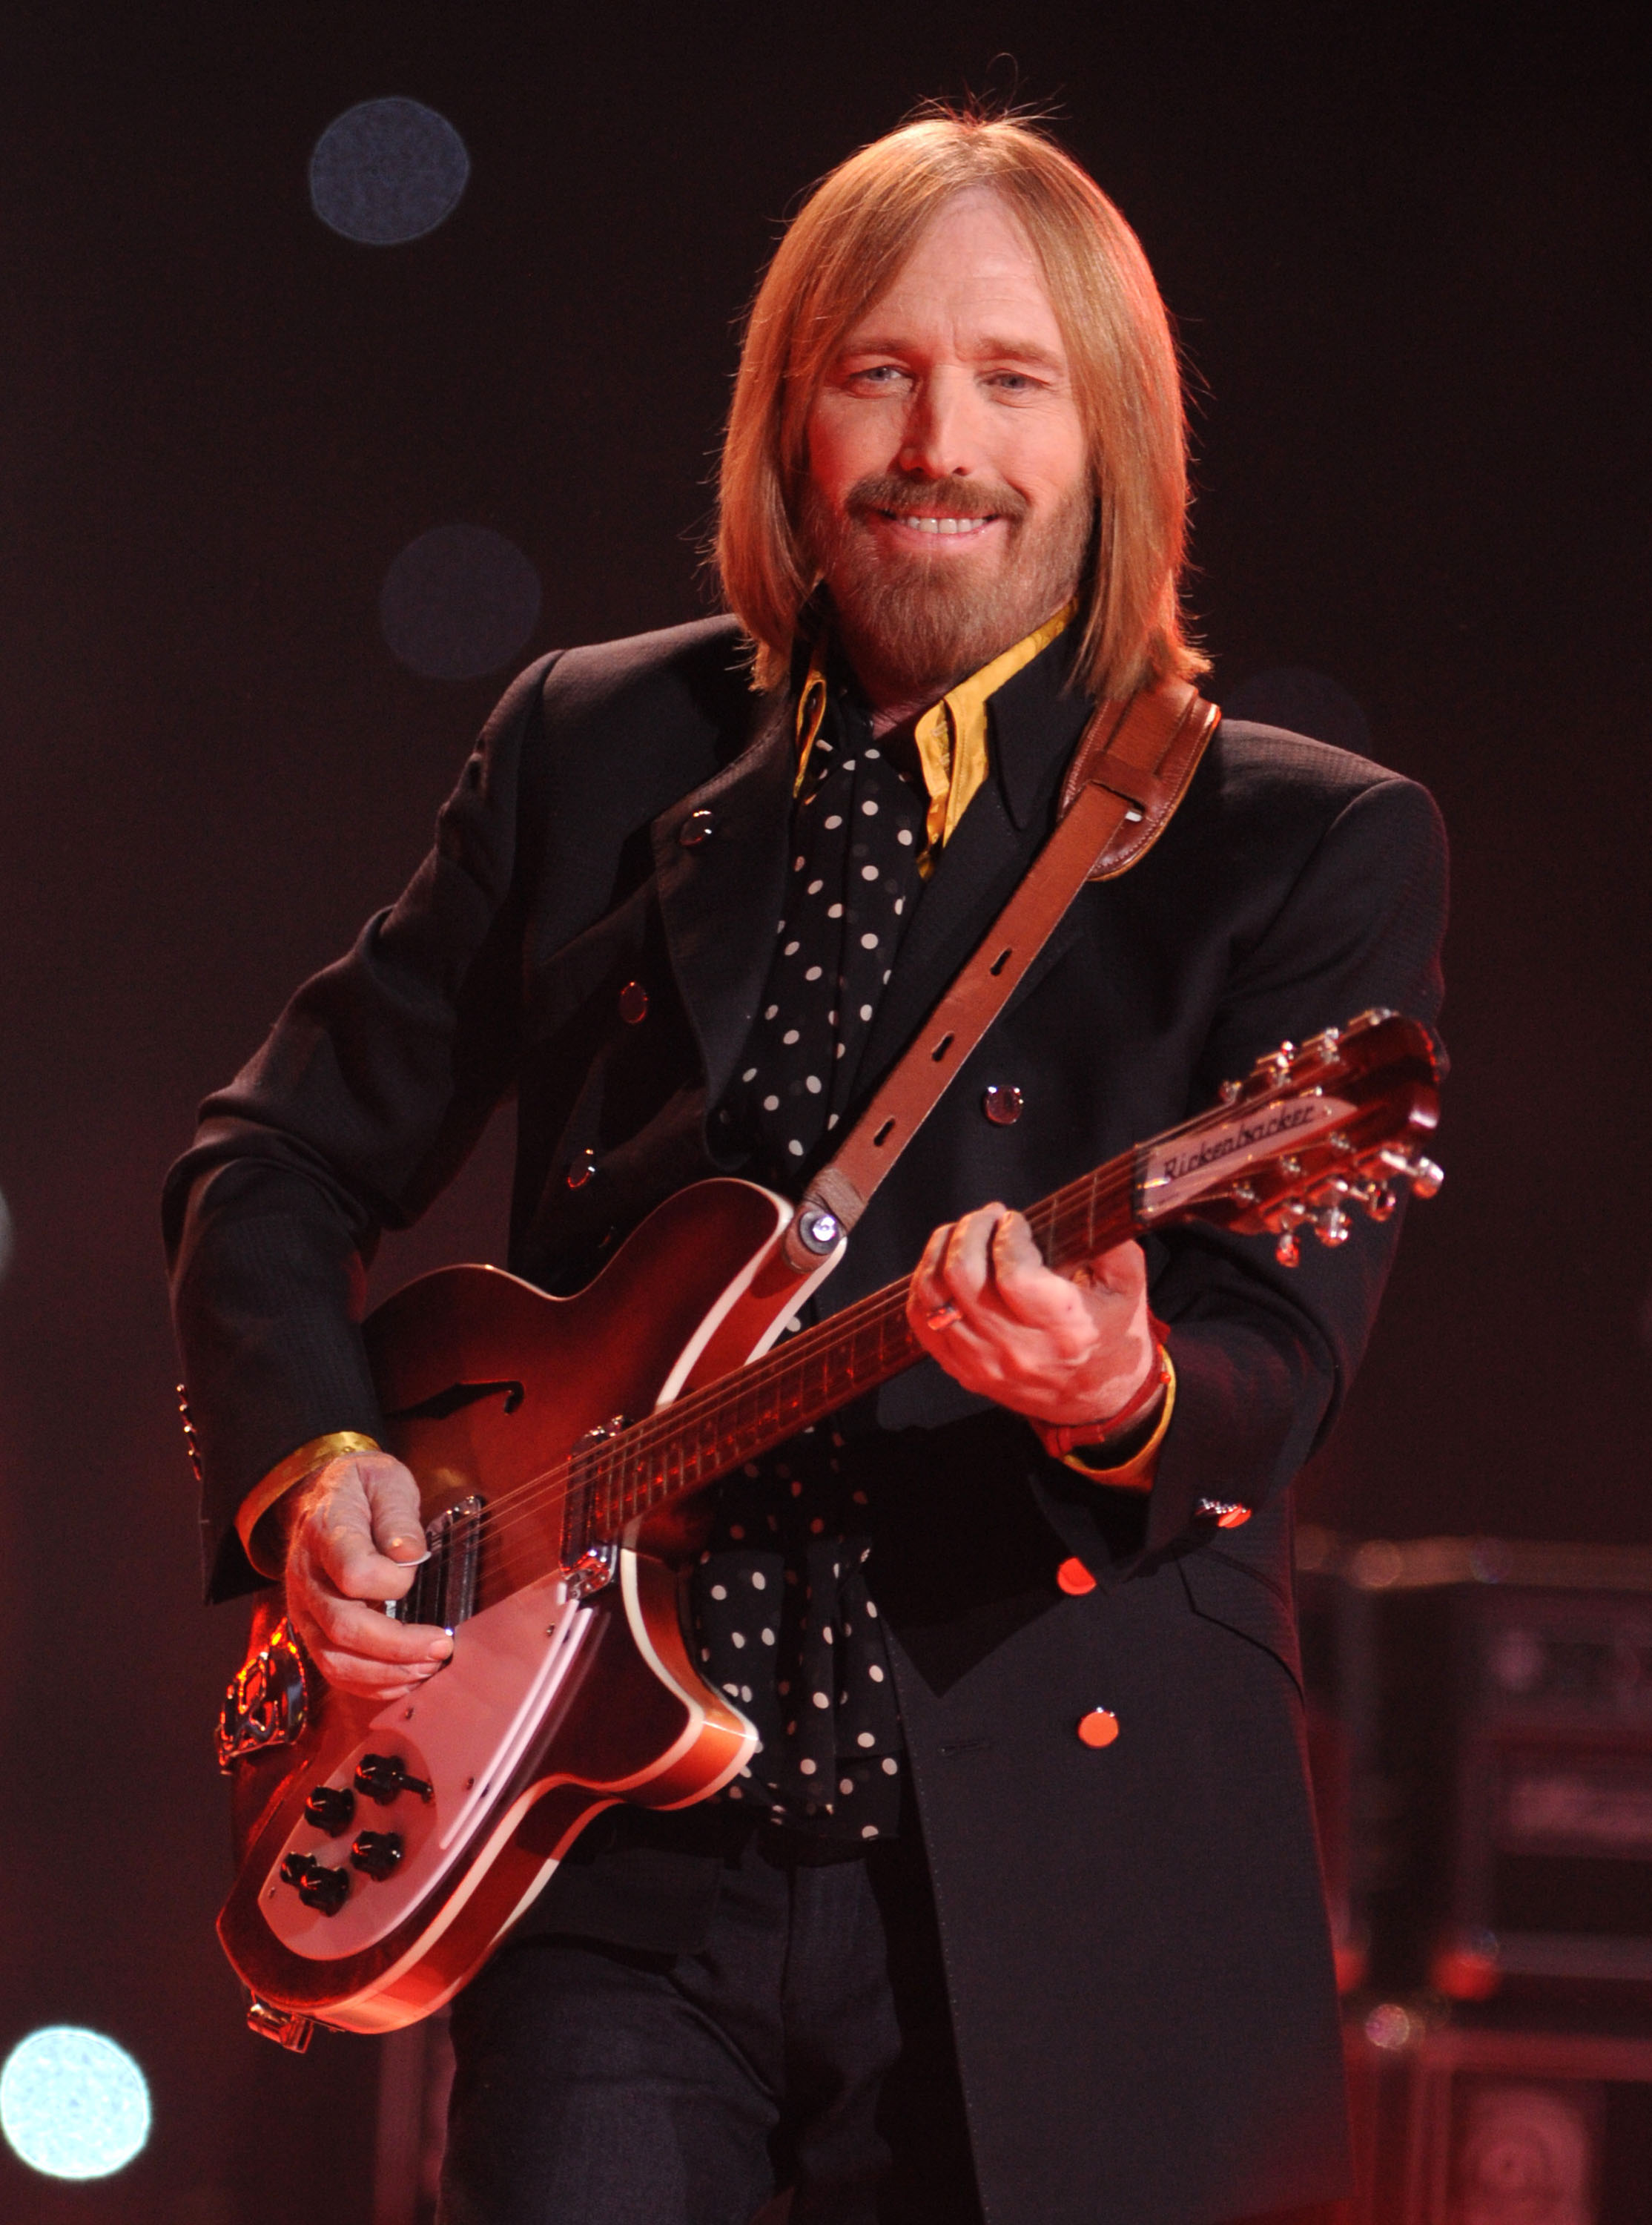 Tom Petty & the Heartbreakers perform during Super Bowl XLII on Feb. 3, 2008 in Glendale, Ariz.